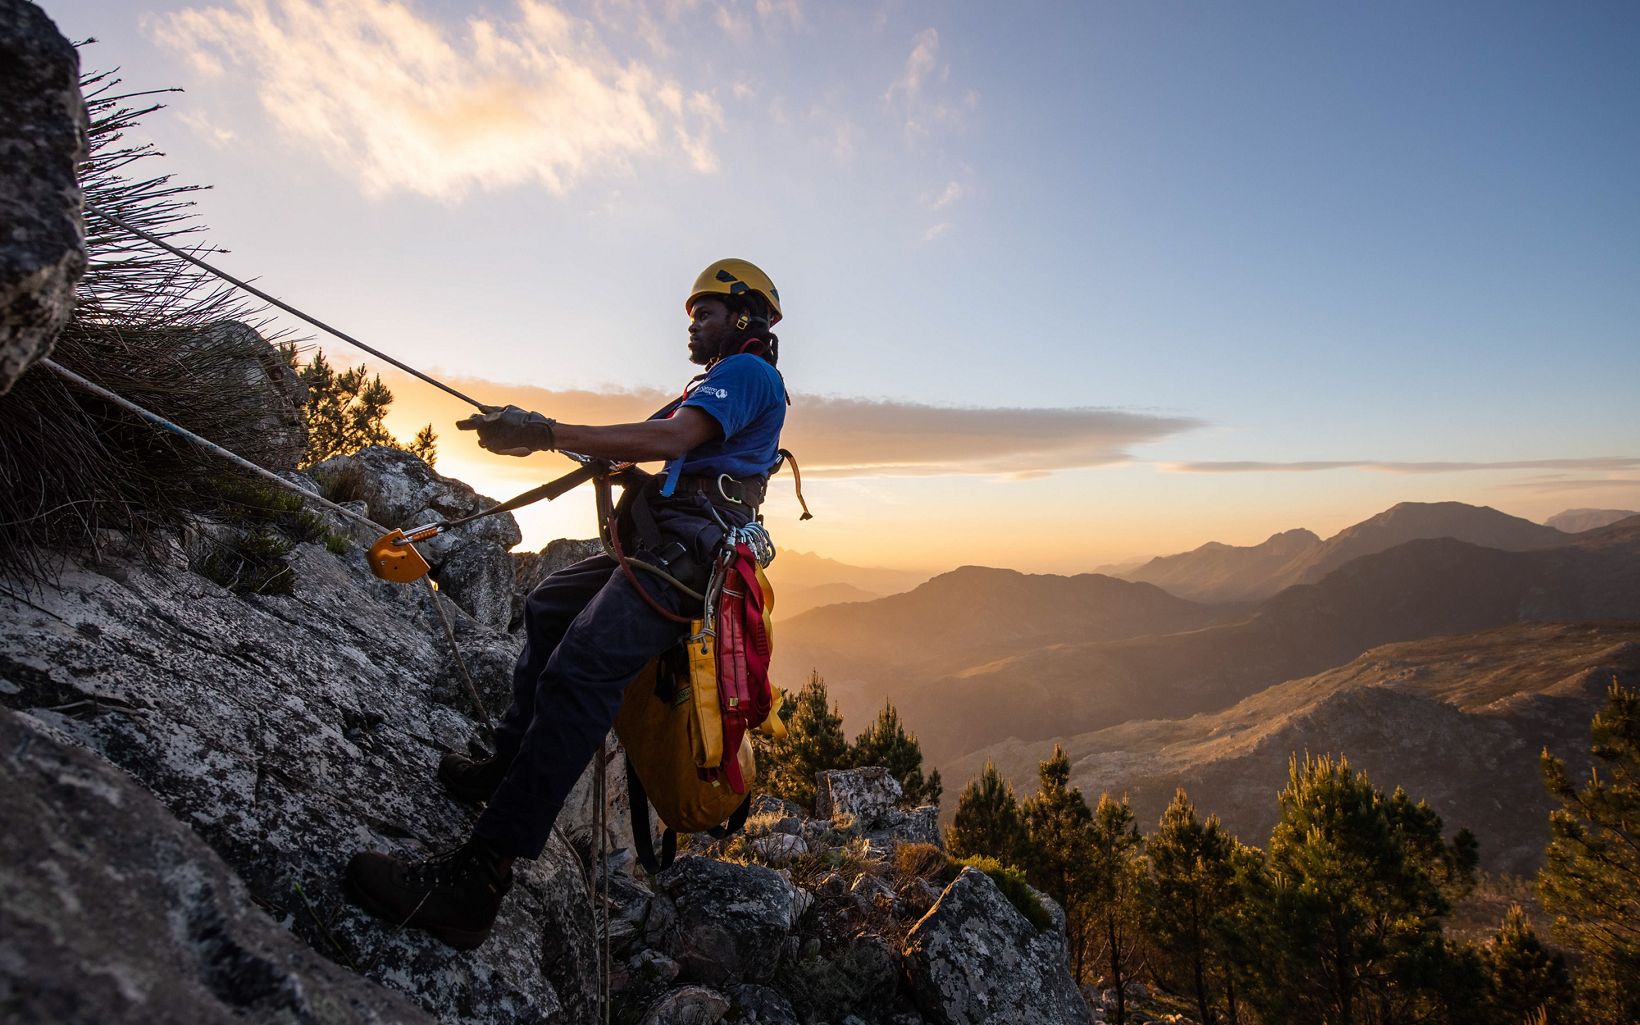 Man climbing down a cliff on a rope against backdrop of a sunrise.